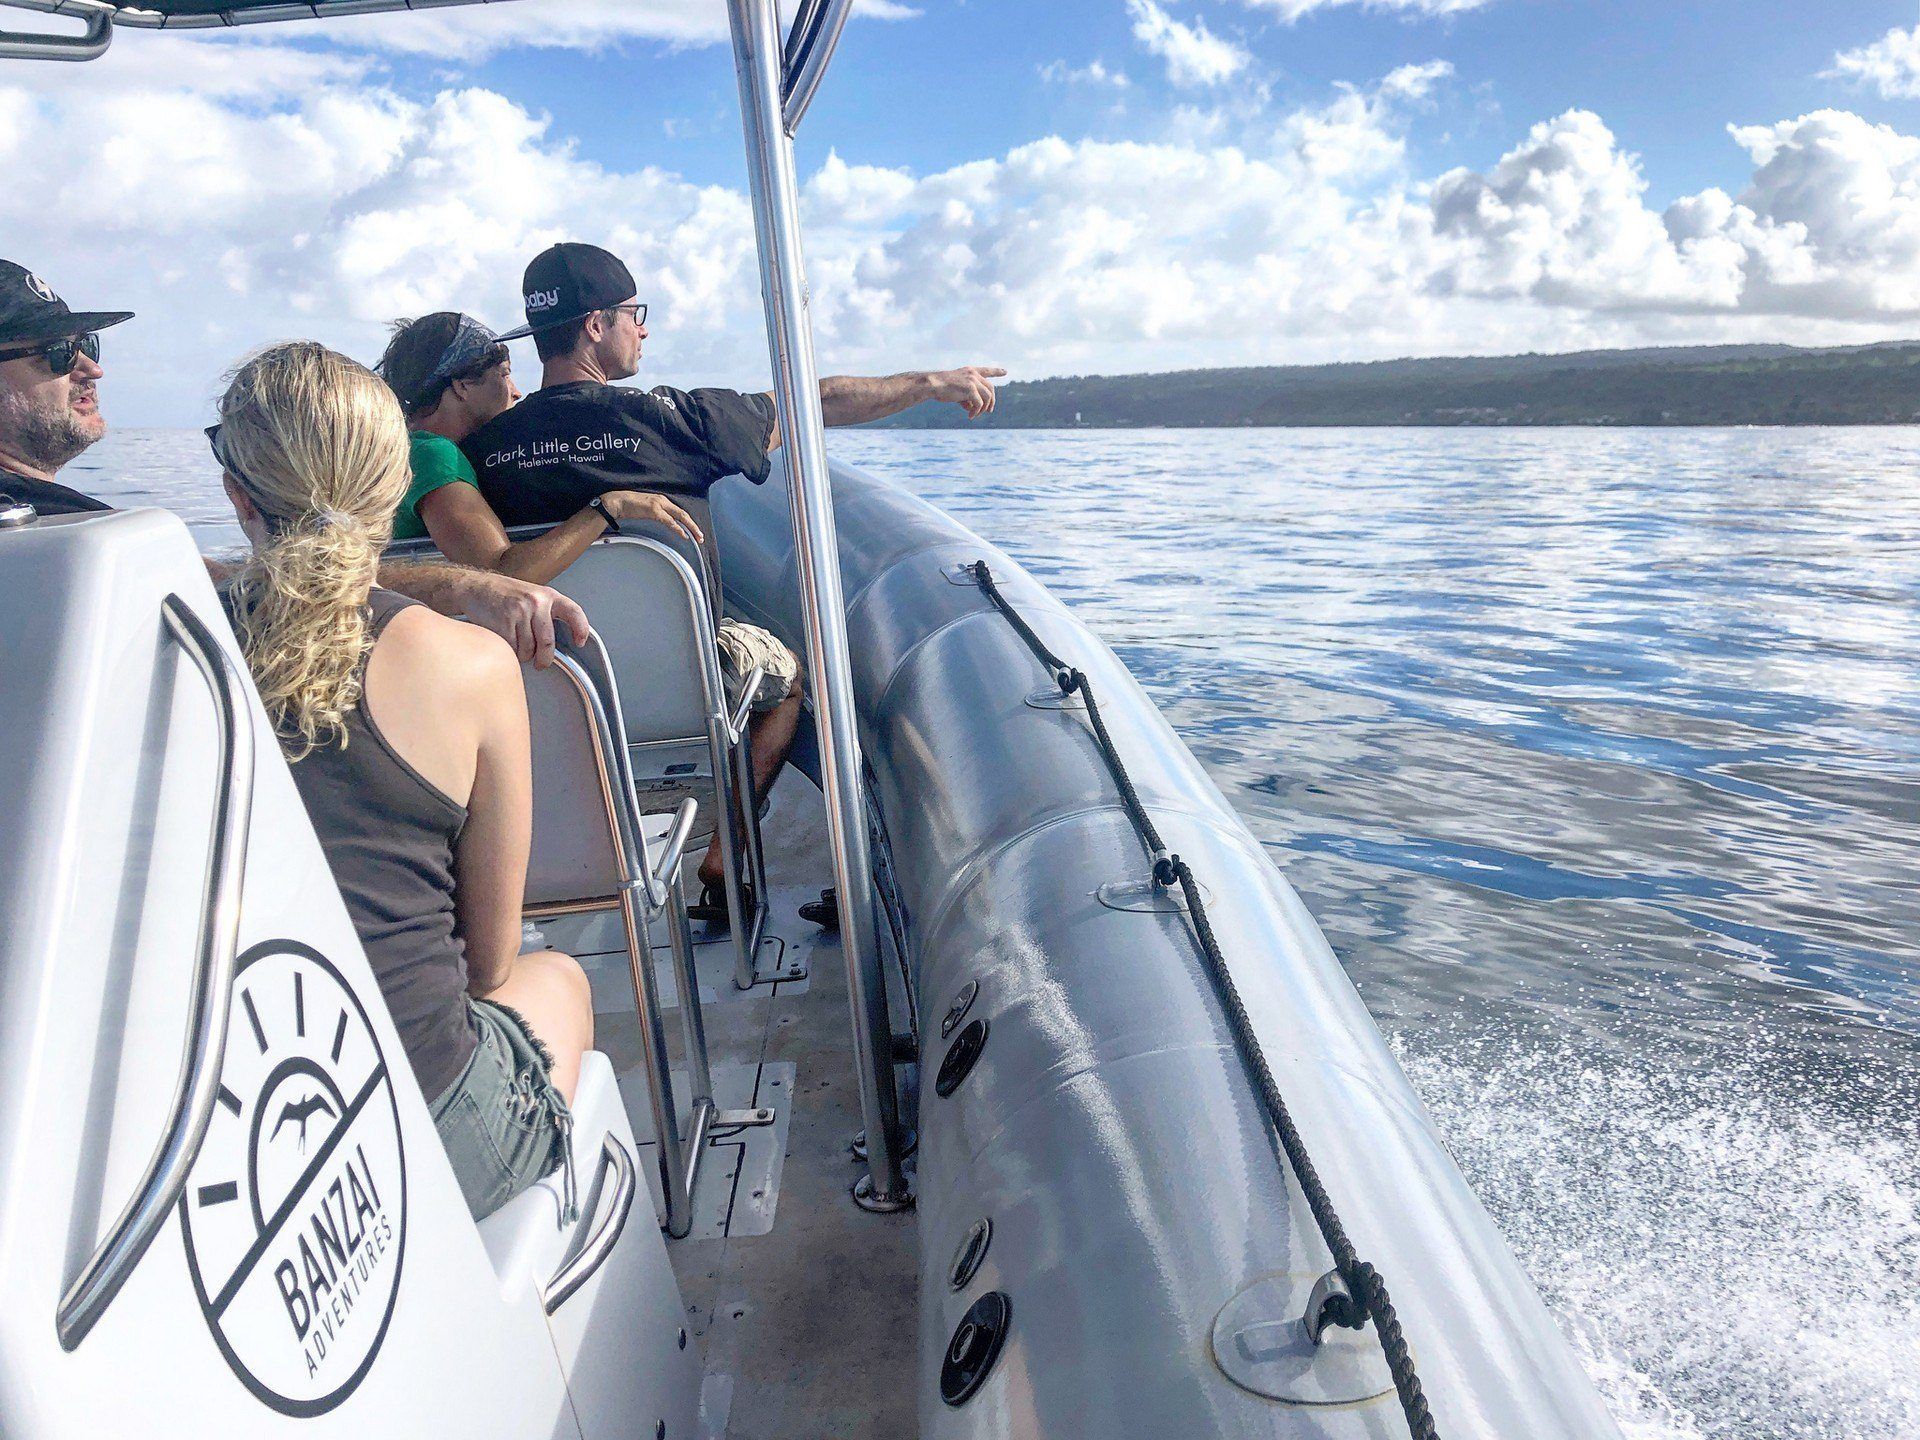 Image of a zodiac boat tour on the coast of Oahu. Whale watching tours are a popular way for visitors to spend time on the island's North Shore. Whale watching in Oahu.